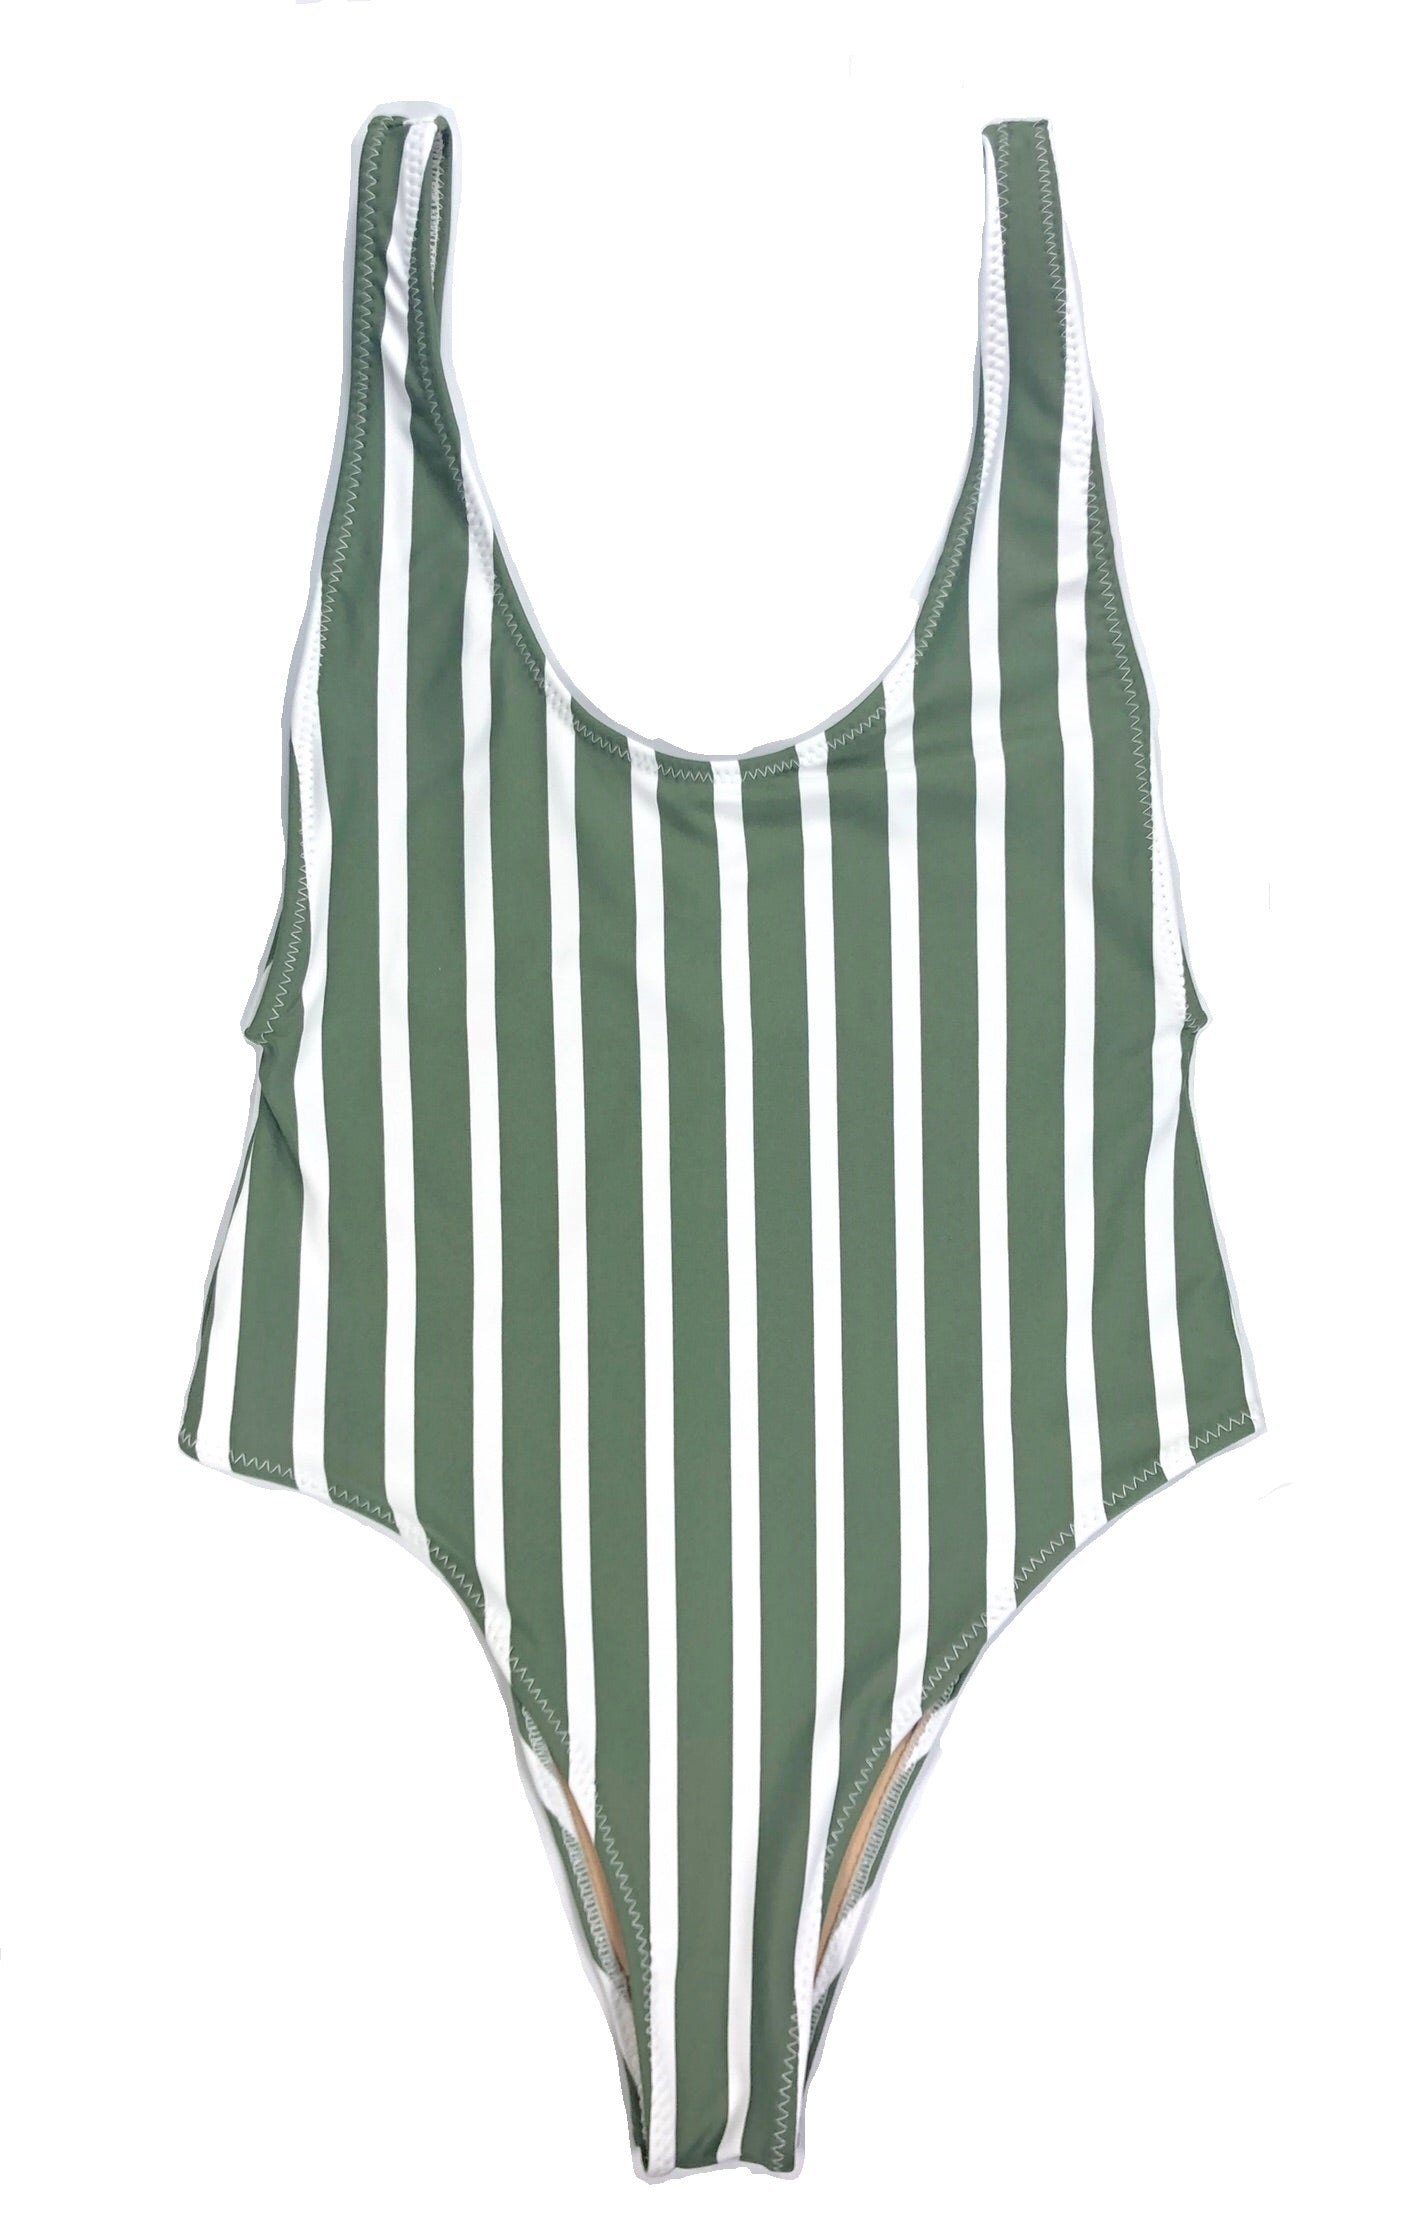 wendolin-designs - Wendolin Designs - Swimsuit - One Piece Swimsuit High Cut- Color Green Striped